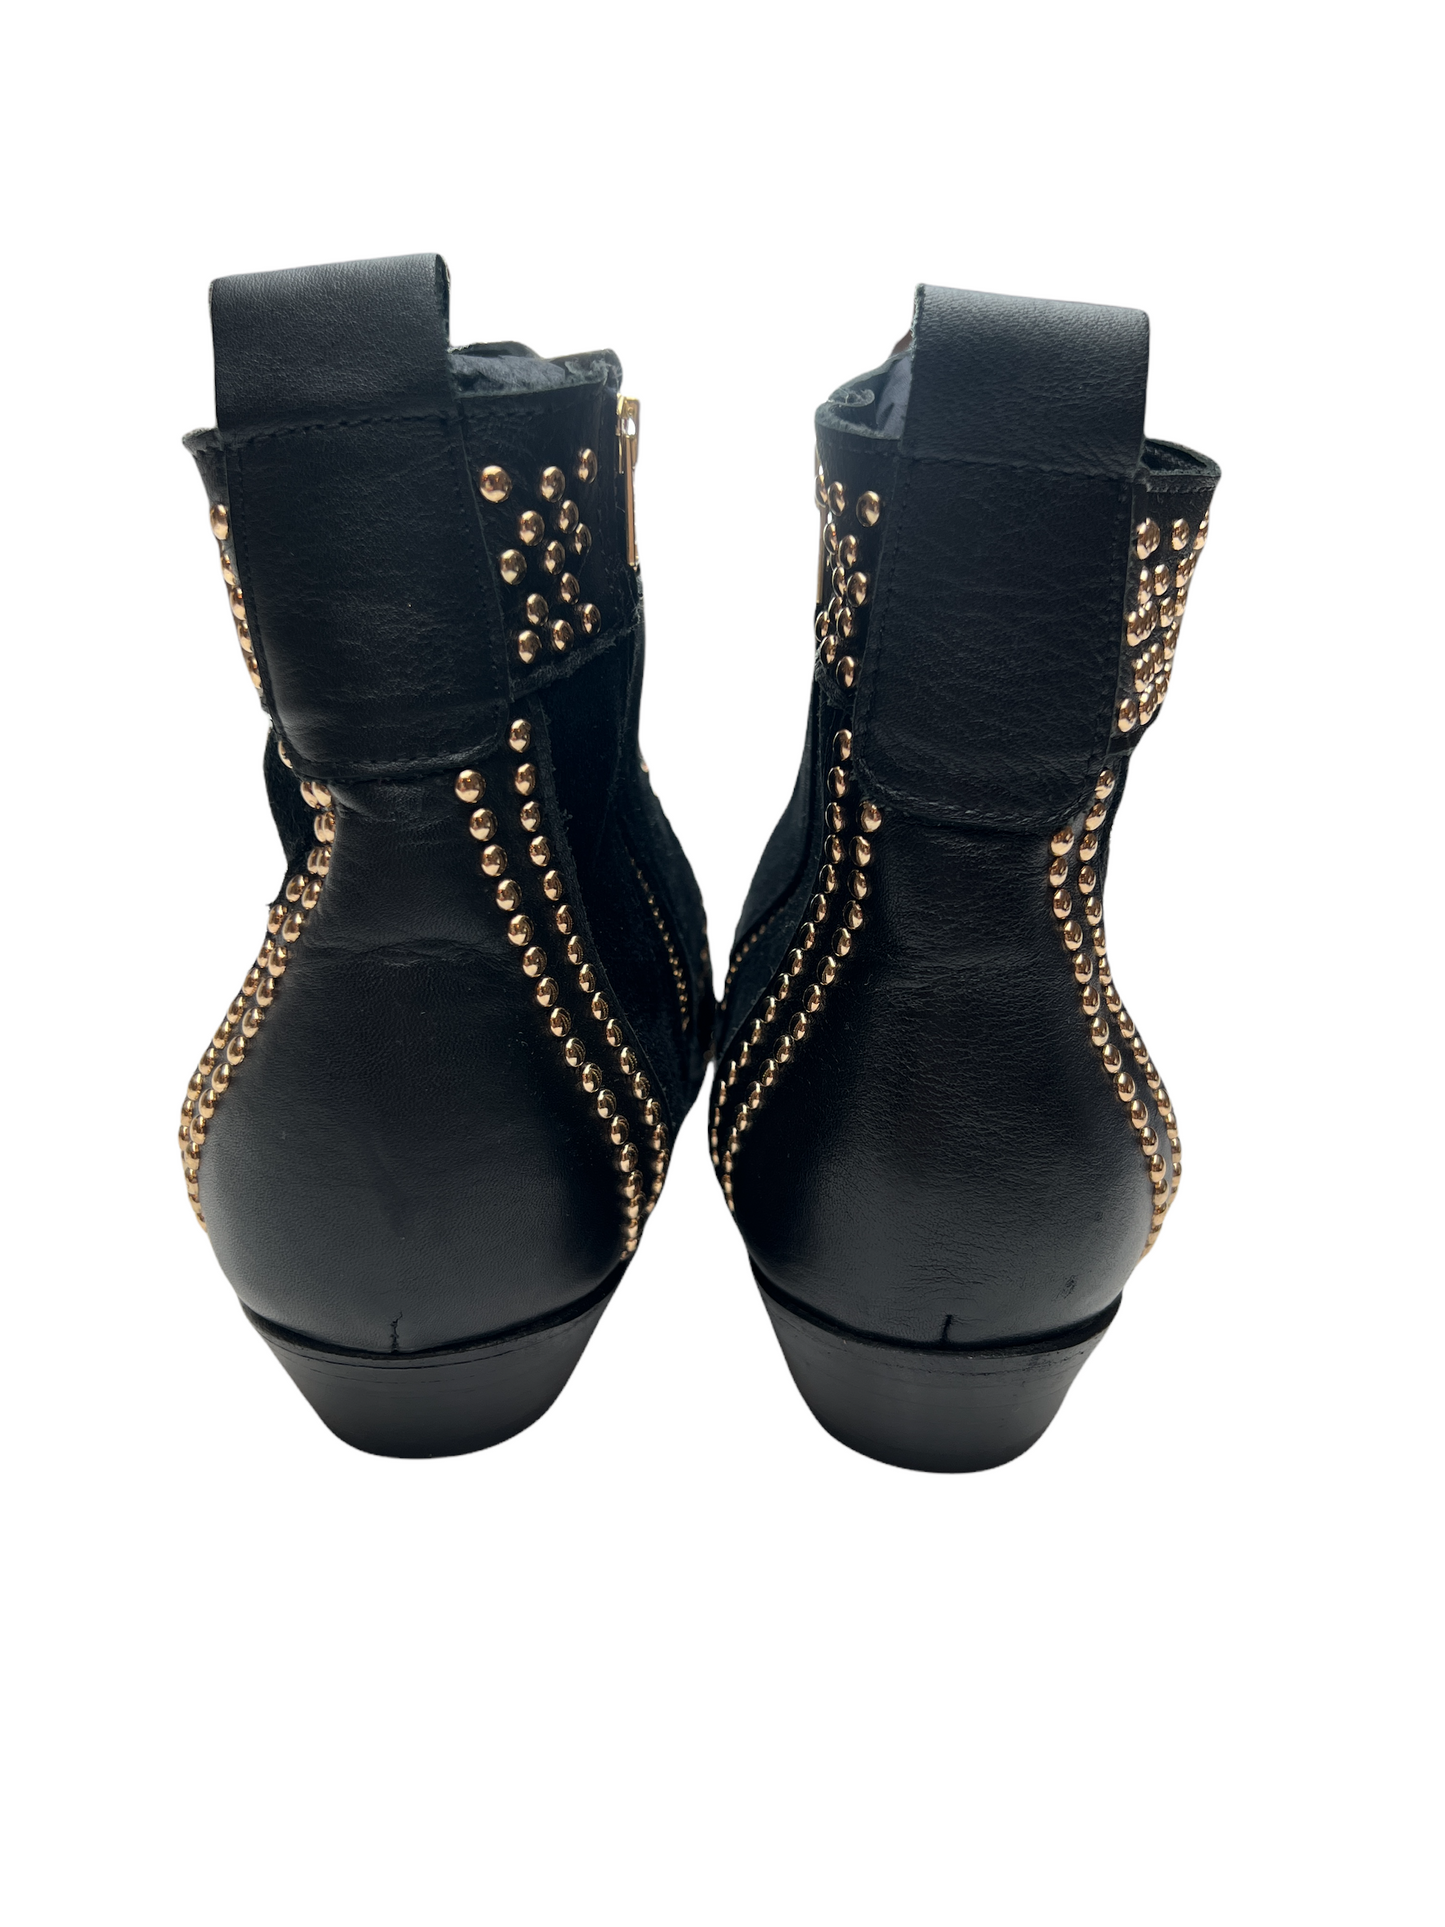 Gold Studded Boots - 11